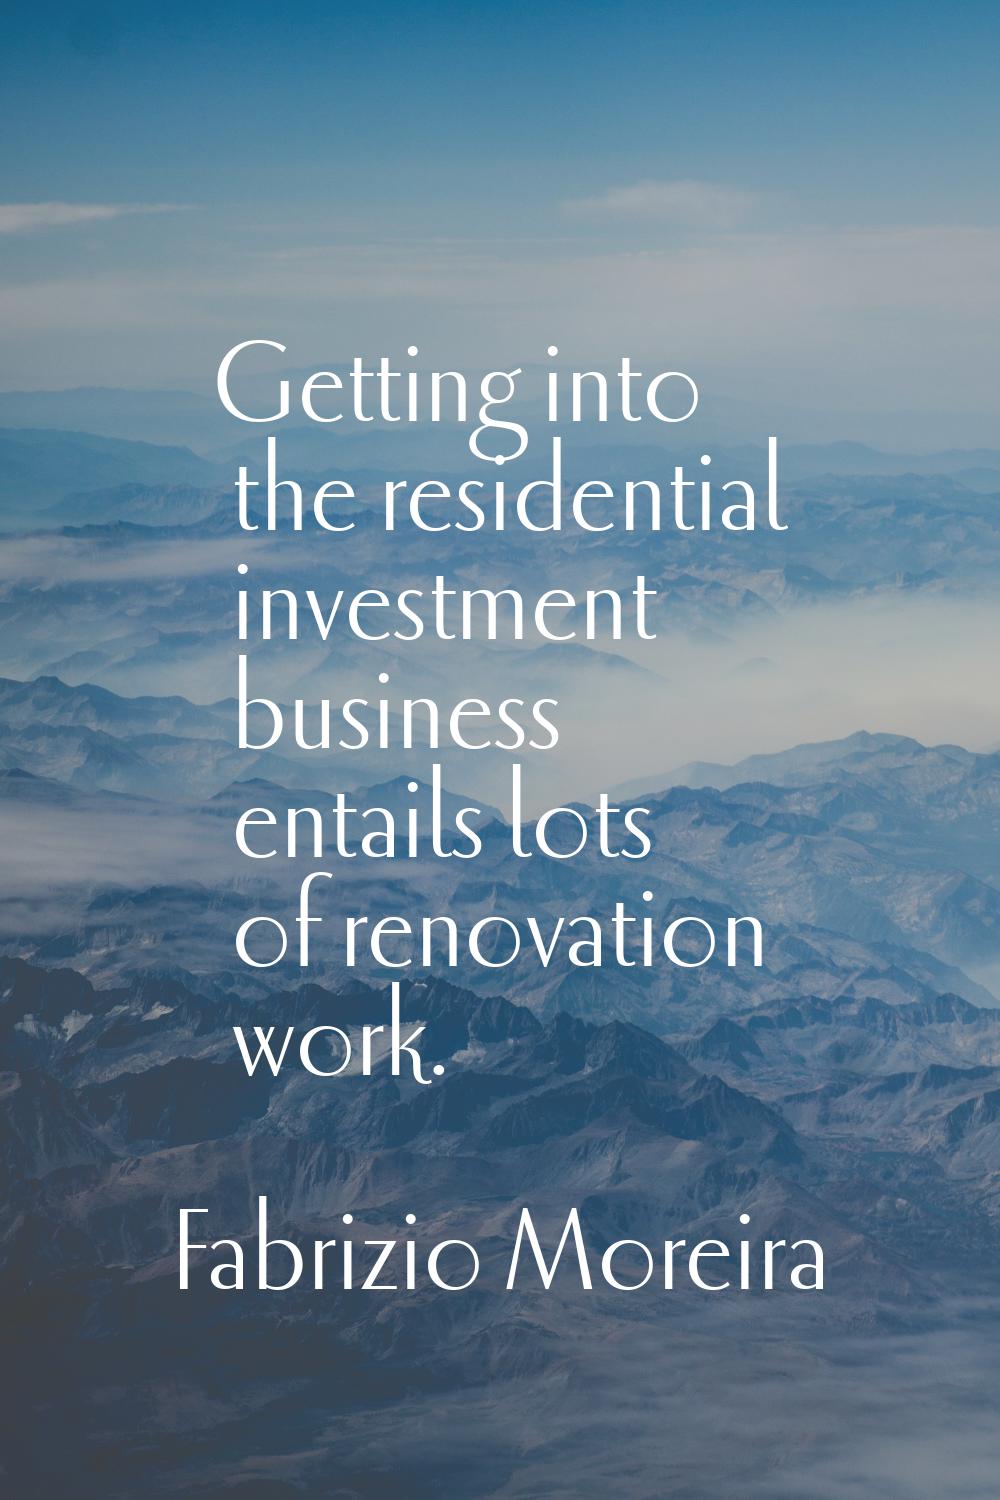 Getting into the residential investment business entails lots of renovation work.